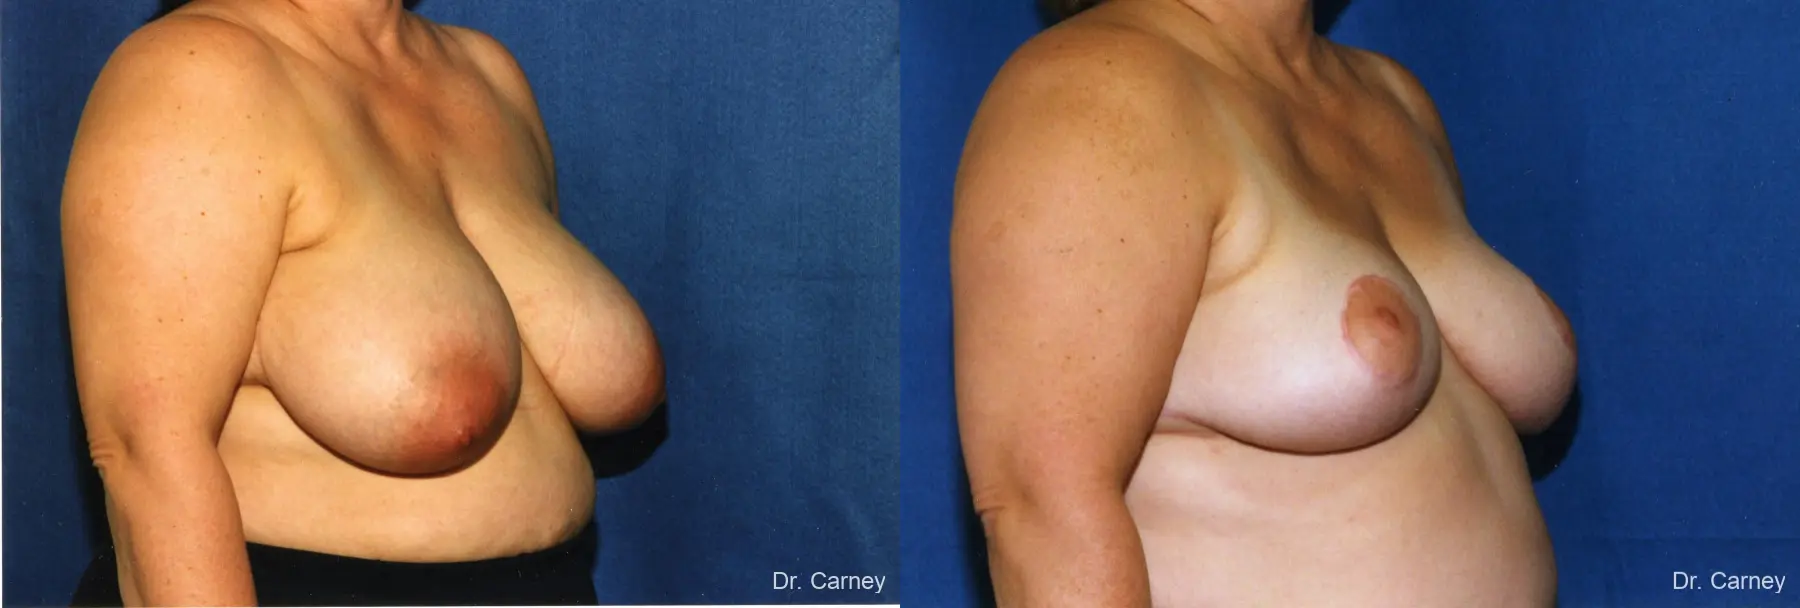 Virginia Beach Breast Lift 1188 - Before and After 1